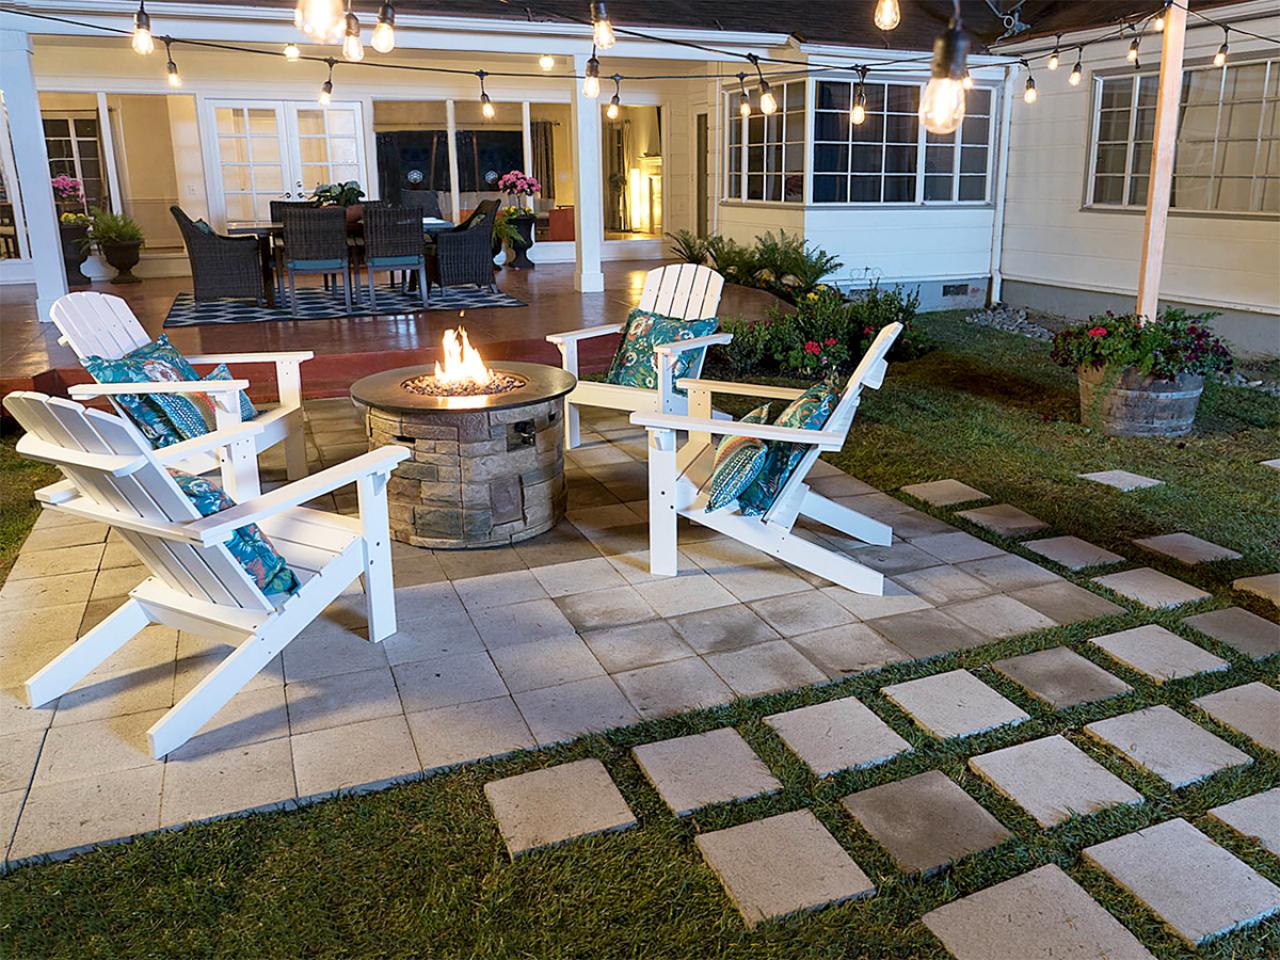 How To Lay A Paver Patio For Firepit, Fire Pit Base For Deck